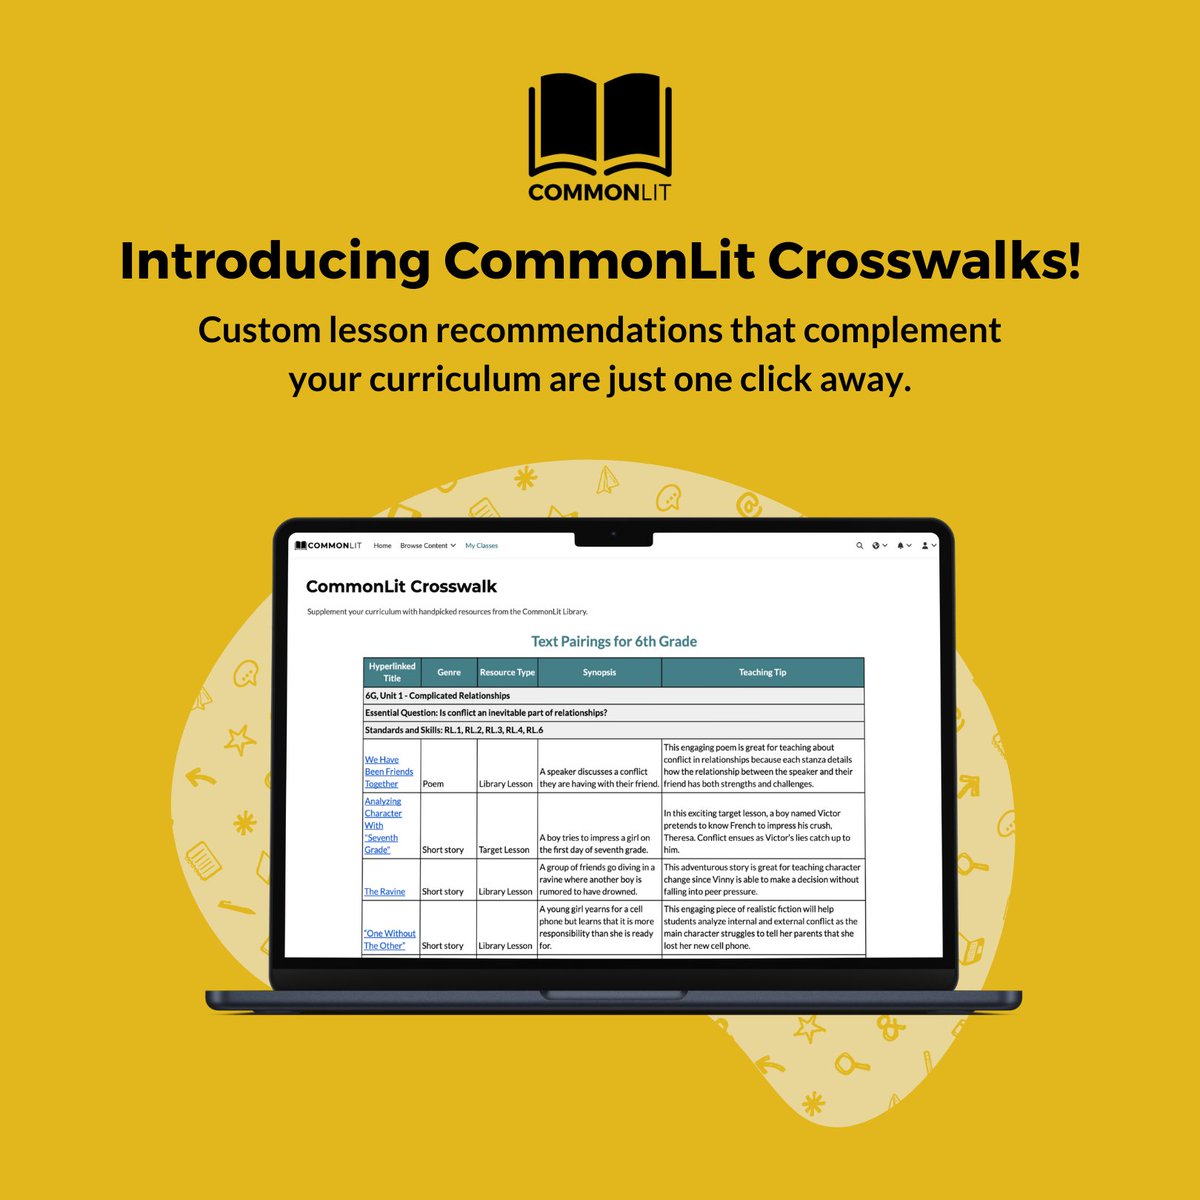 Introducing CommonLit Crosswalks! ✏️ Calling all admin: are you looking for resources to enhance your current curriculum? Get a customized plan with hand-picked lessons tailored to your instructional goals. Learn more: commonlit.org/en/crosswalks